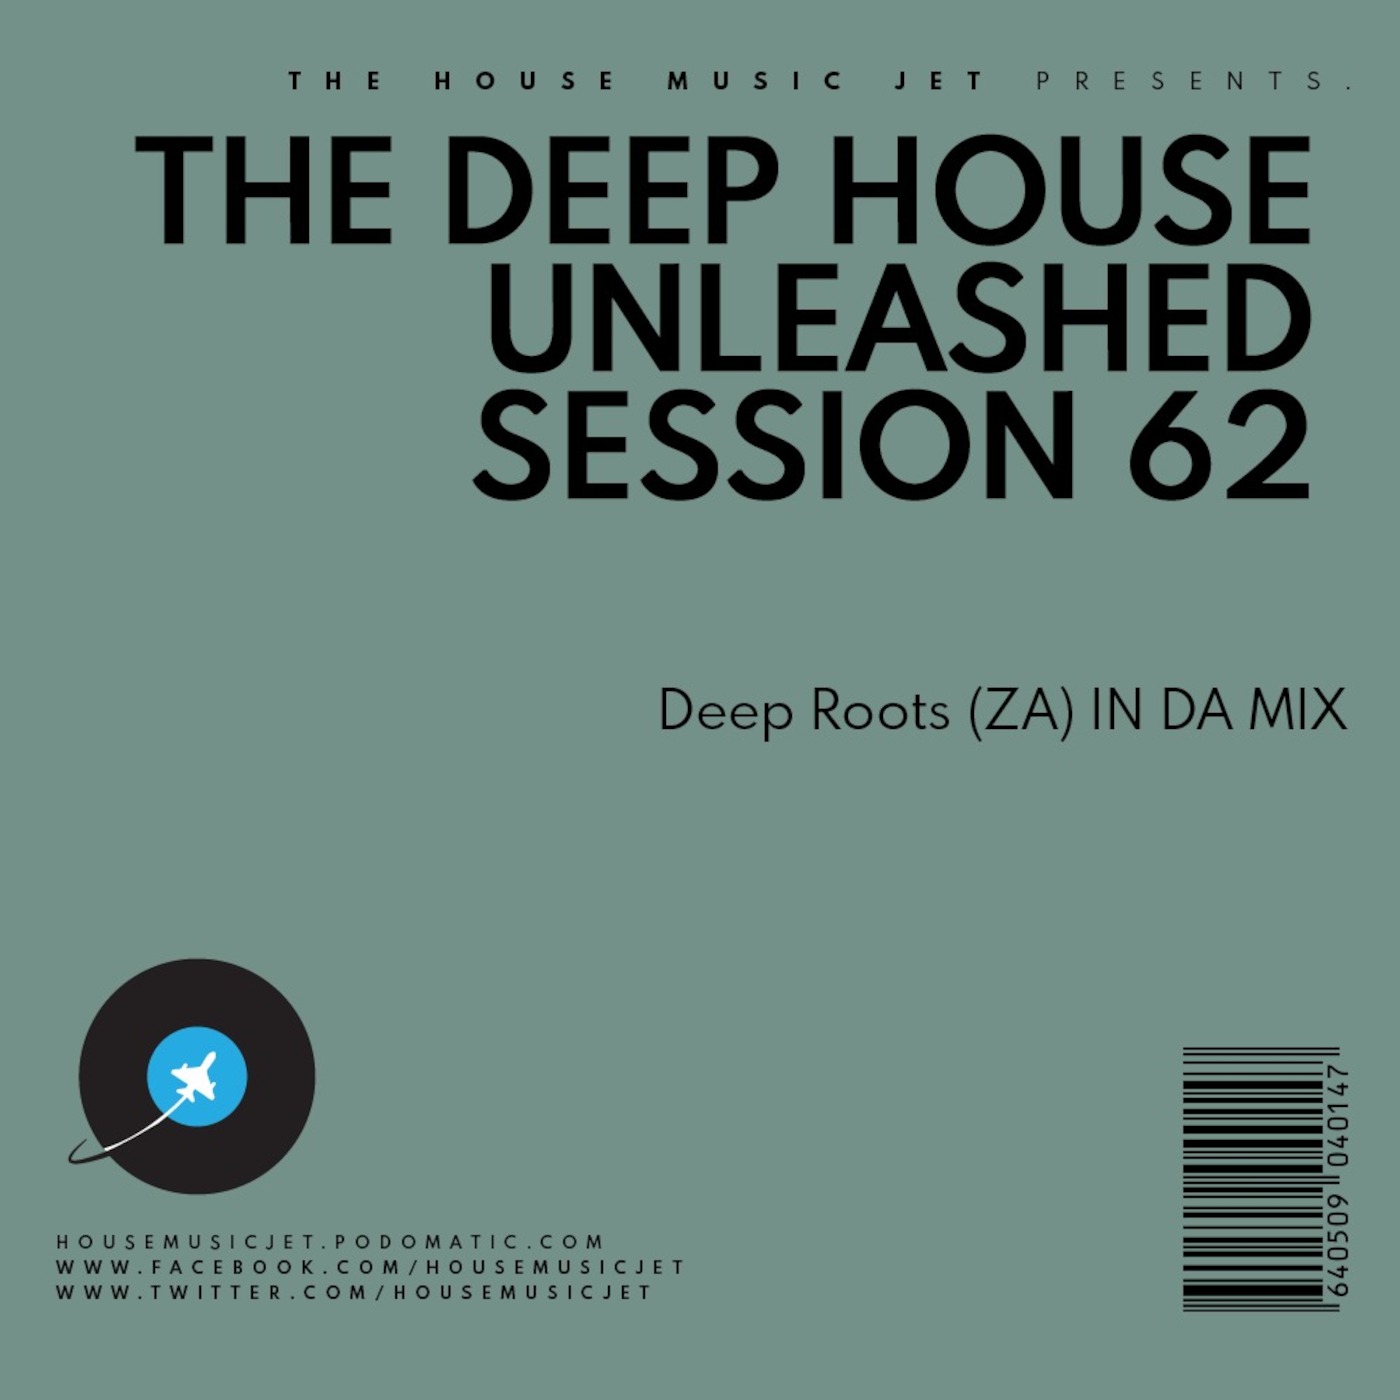 Deep Roots (ZA) In Da Mix - Deep House Unleashed Session 62